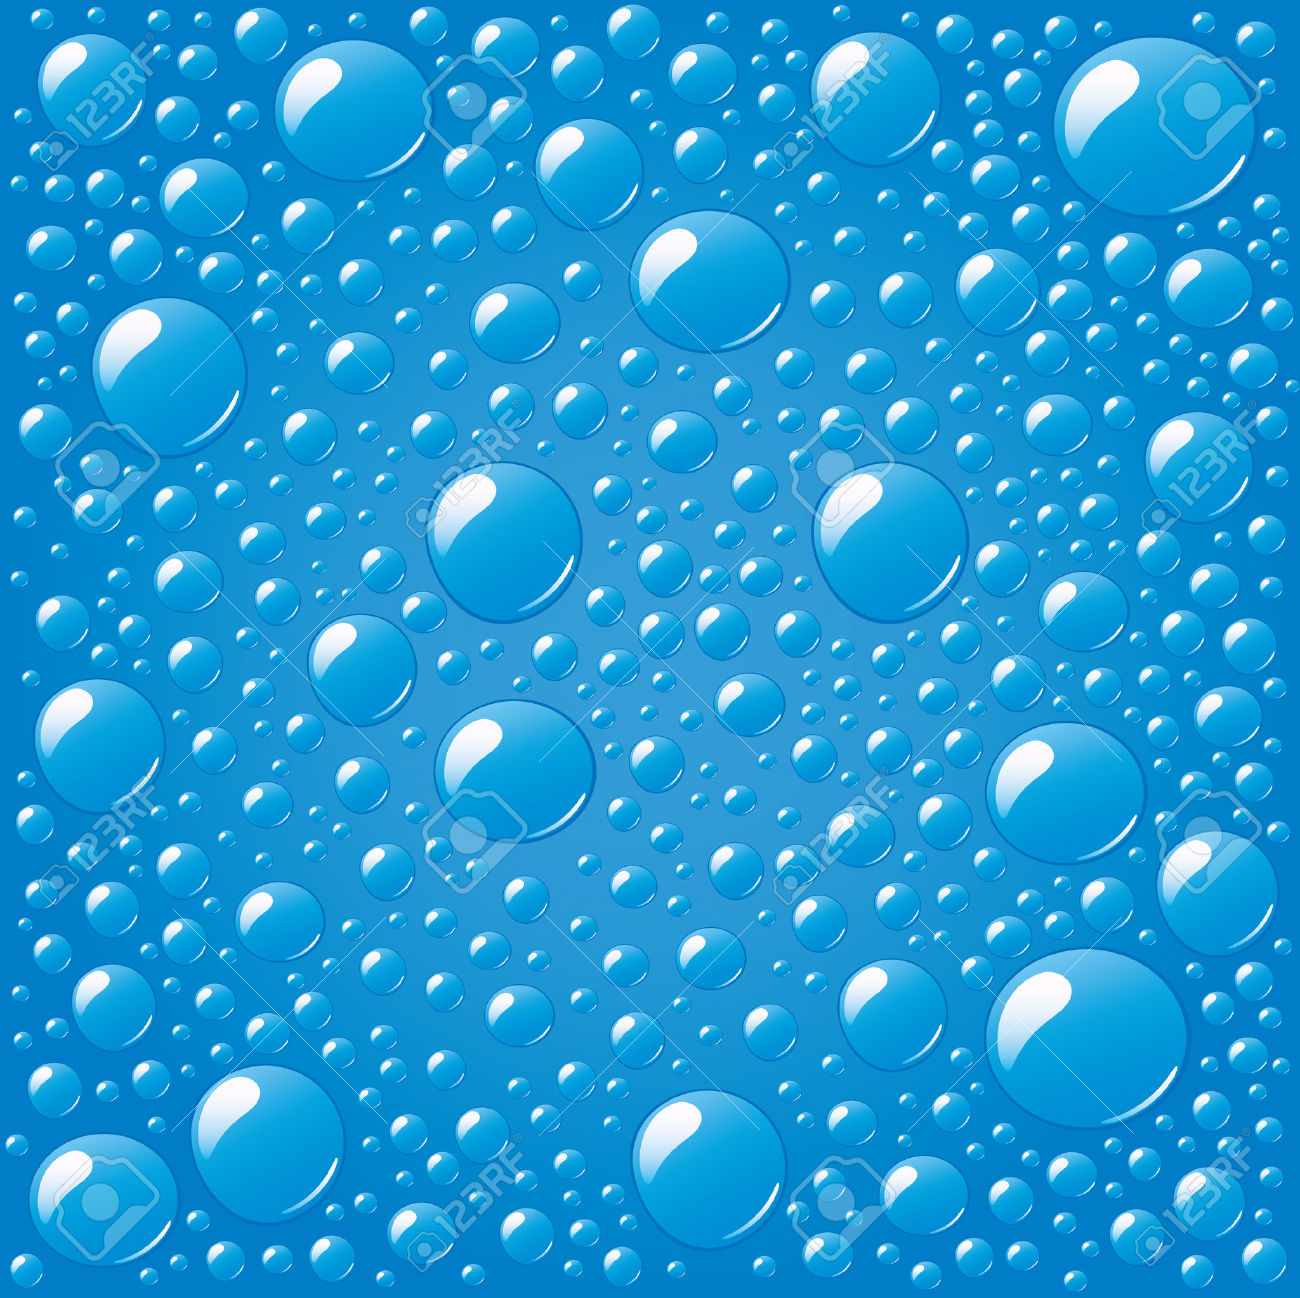 Free Blue Water Background Clipart.